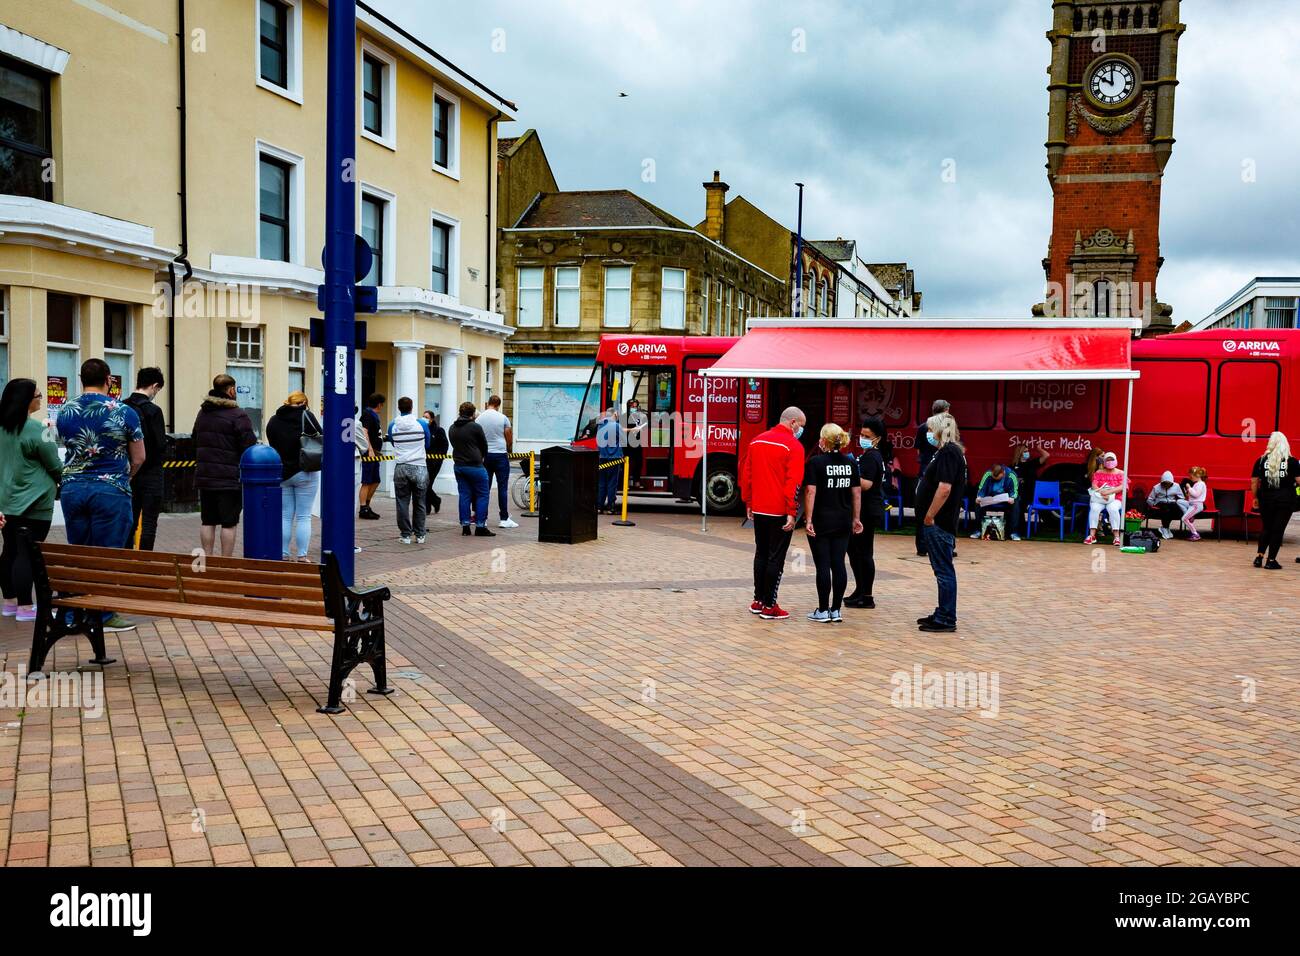 A queue of people awaiting Covid 19 vaccinations at a temporary facility in a red bus at Redcar cleveland helpers wearing tops with Grab a jab on the Stock Photo